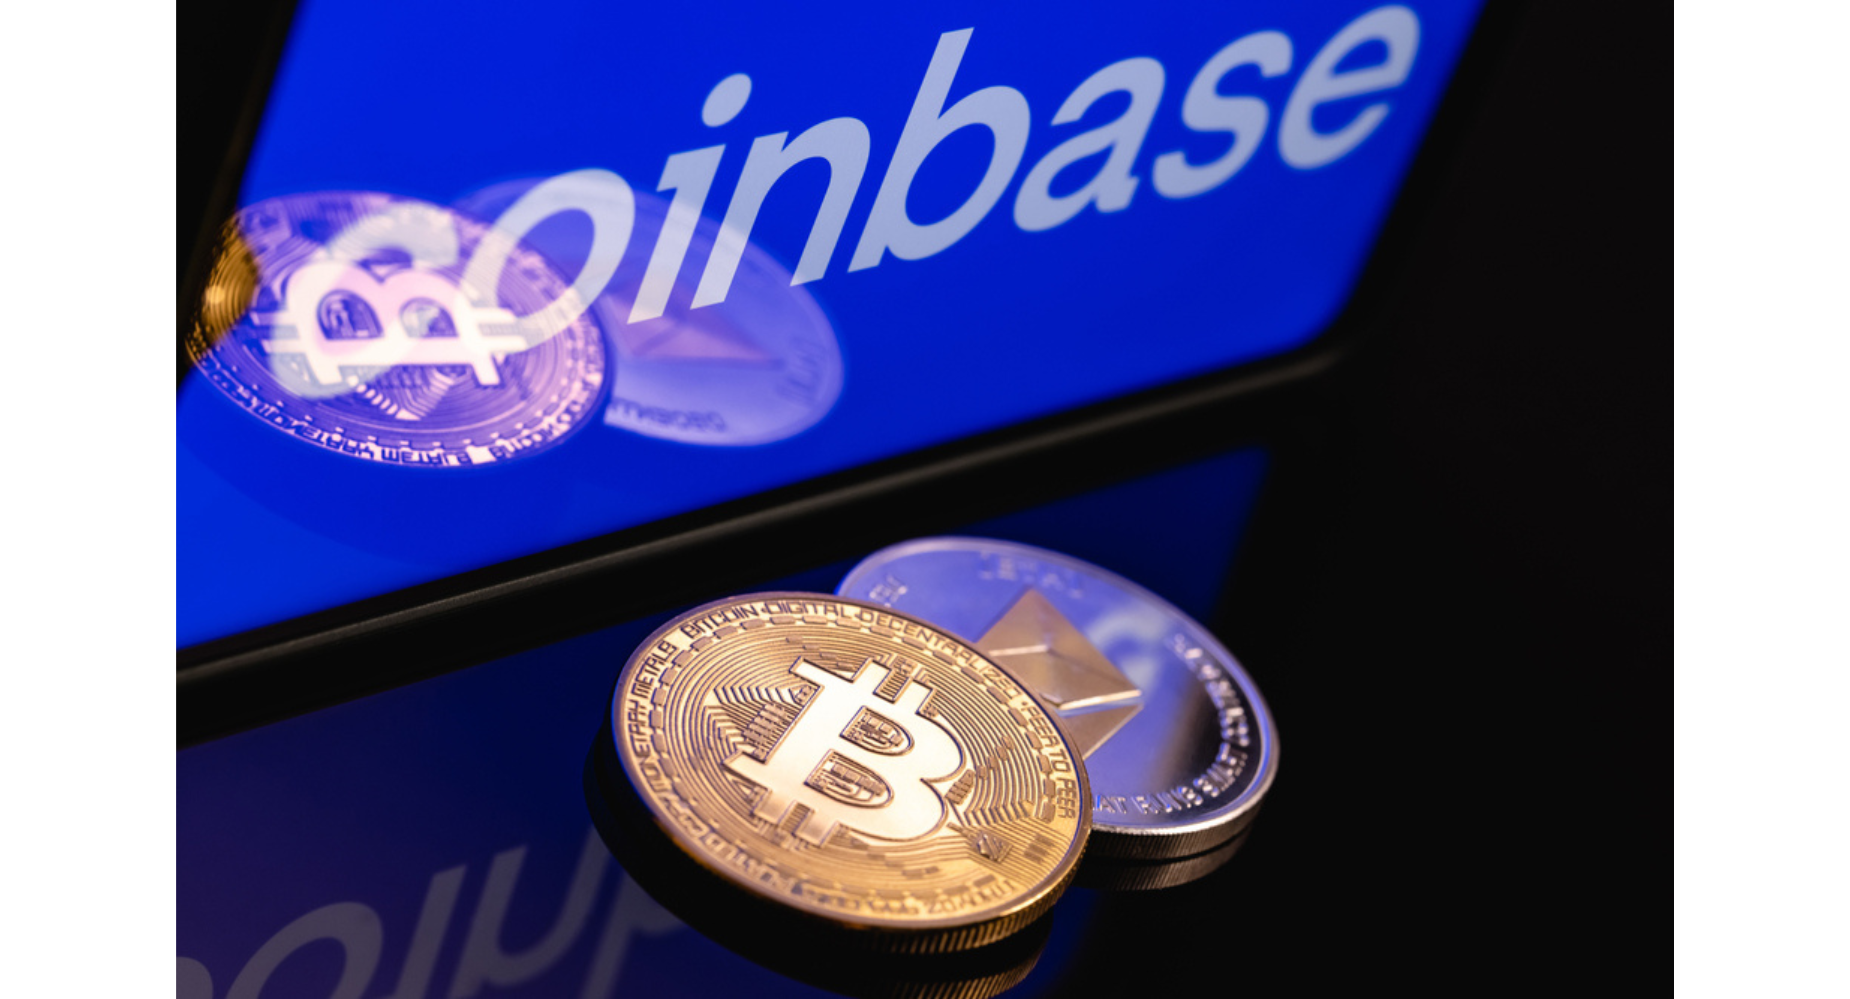 Coinbase Plunges Despite Bitcoin, Ethereum Holding Strong: What's Going On?